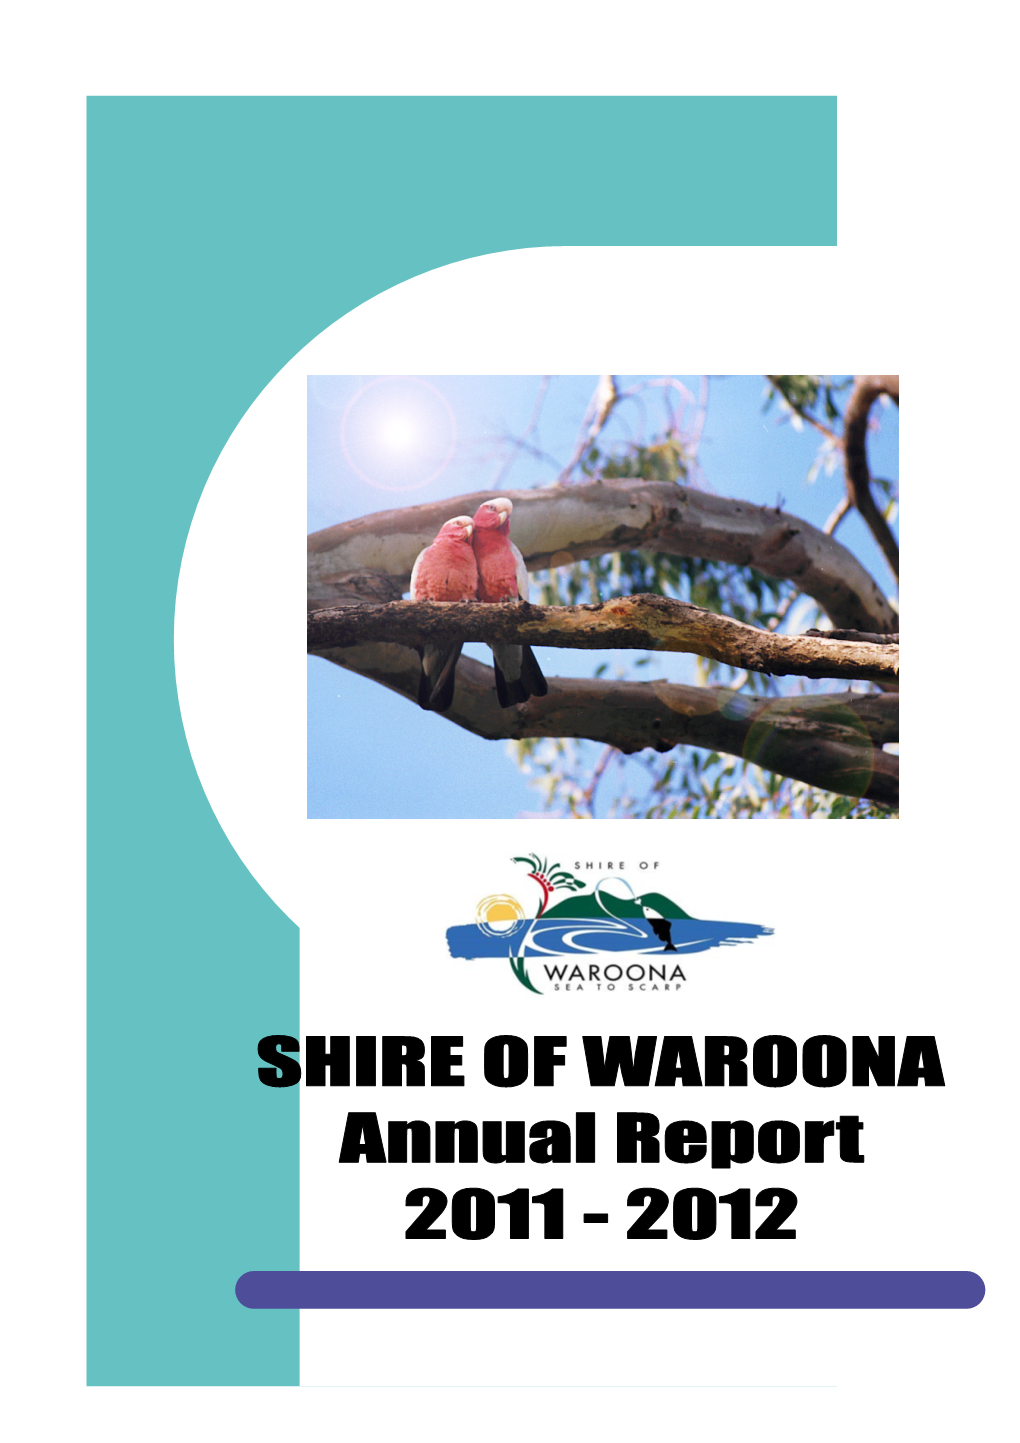 2011/12 Annual Report & Financial Statements